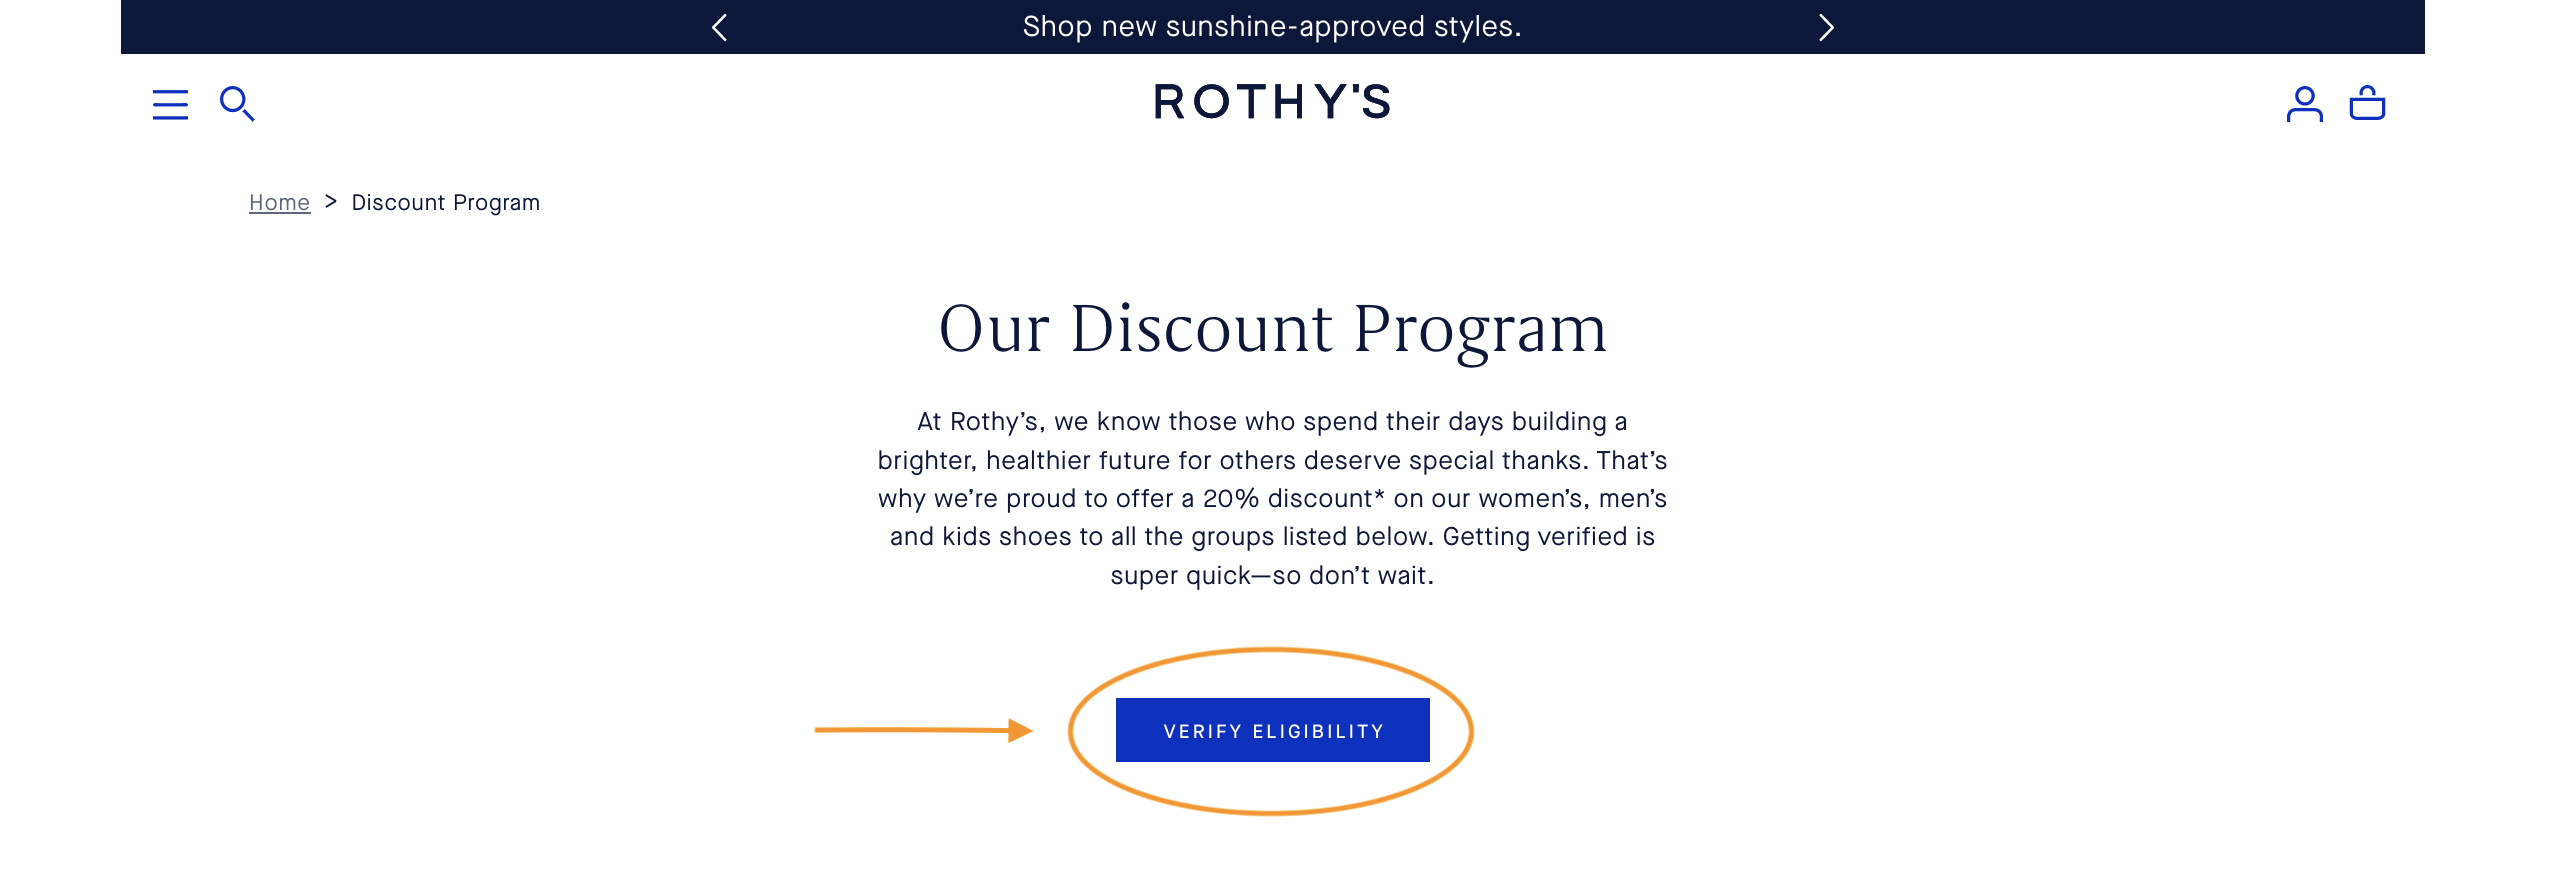 Example of a CTA button on Rothy's website